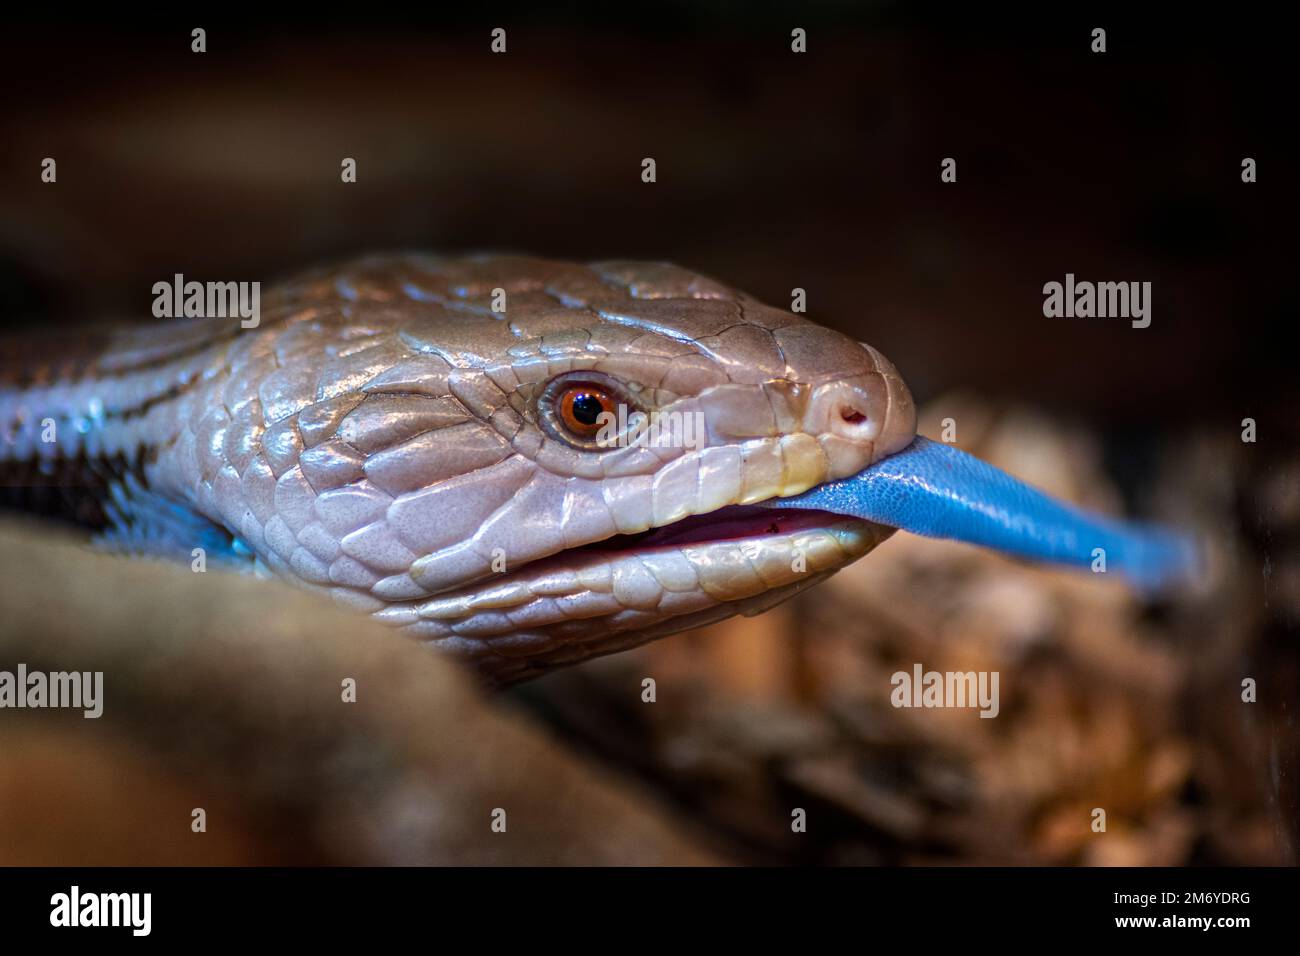 Close up portrait of head of Eastern blue-tongue lizard (Tiliqua scincoides) with tongue protruding. Stock Photo